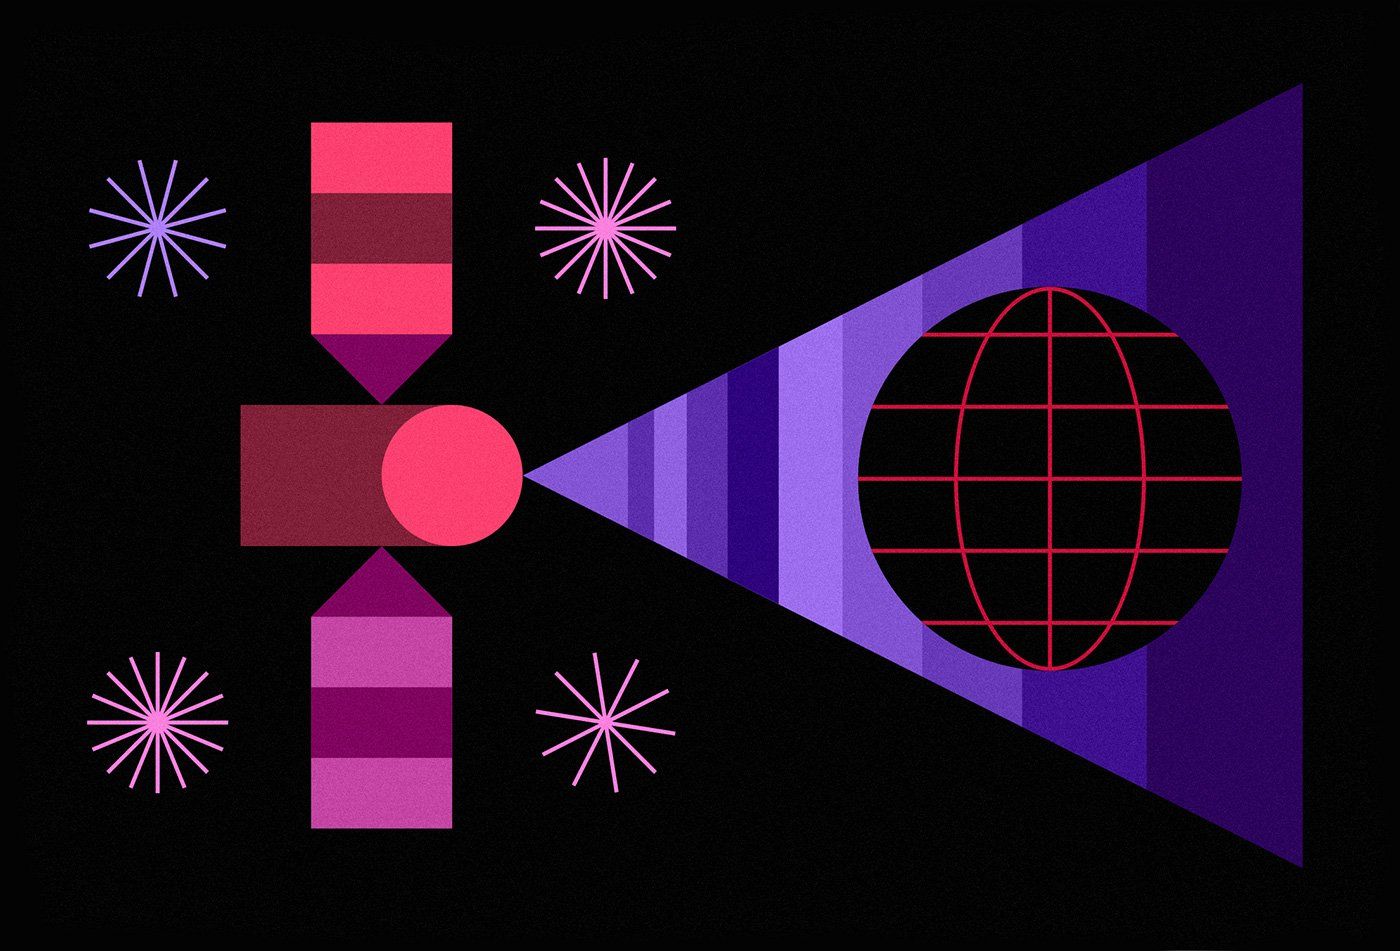 pink and purple illustration of different shapes placed together to look like a satellite and world against a black background